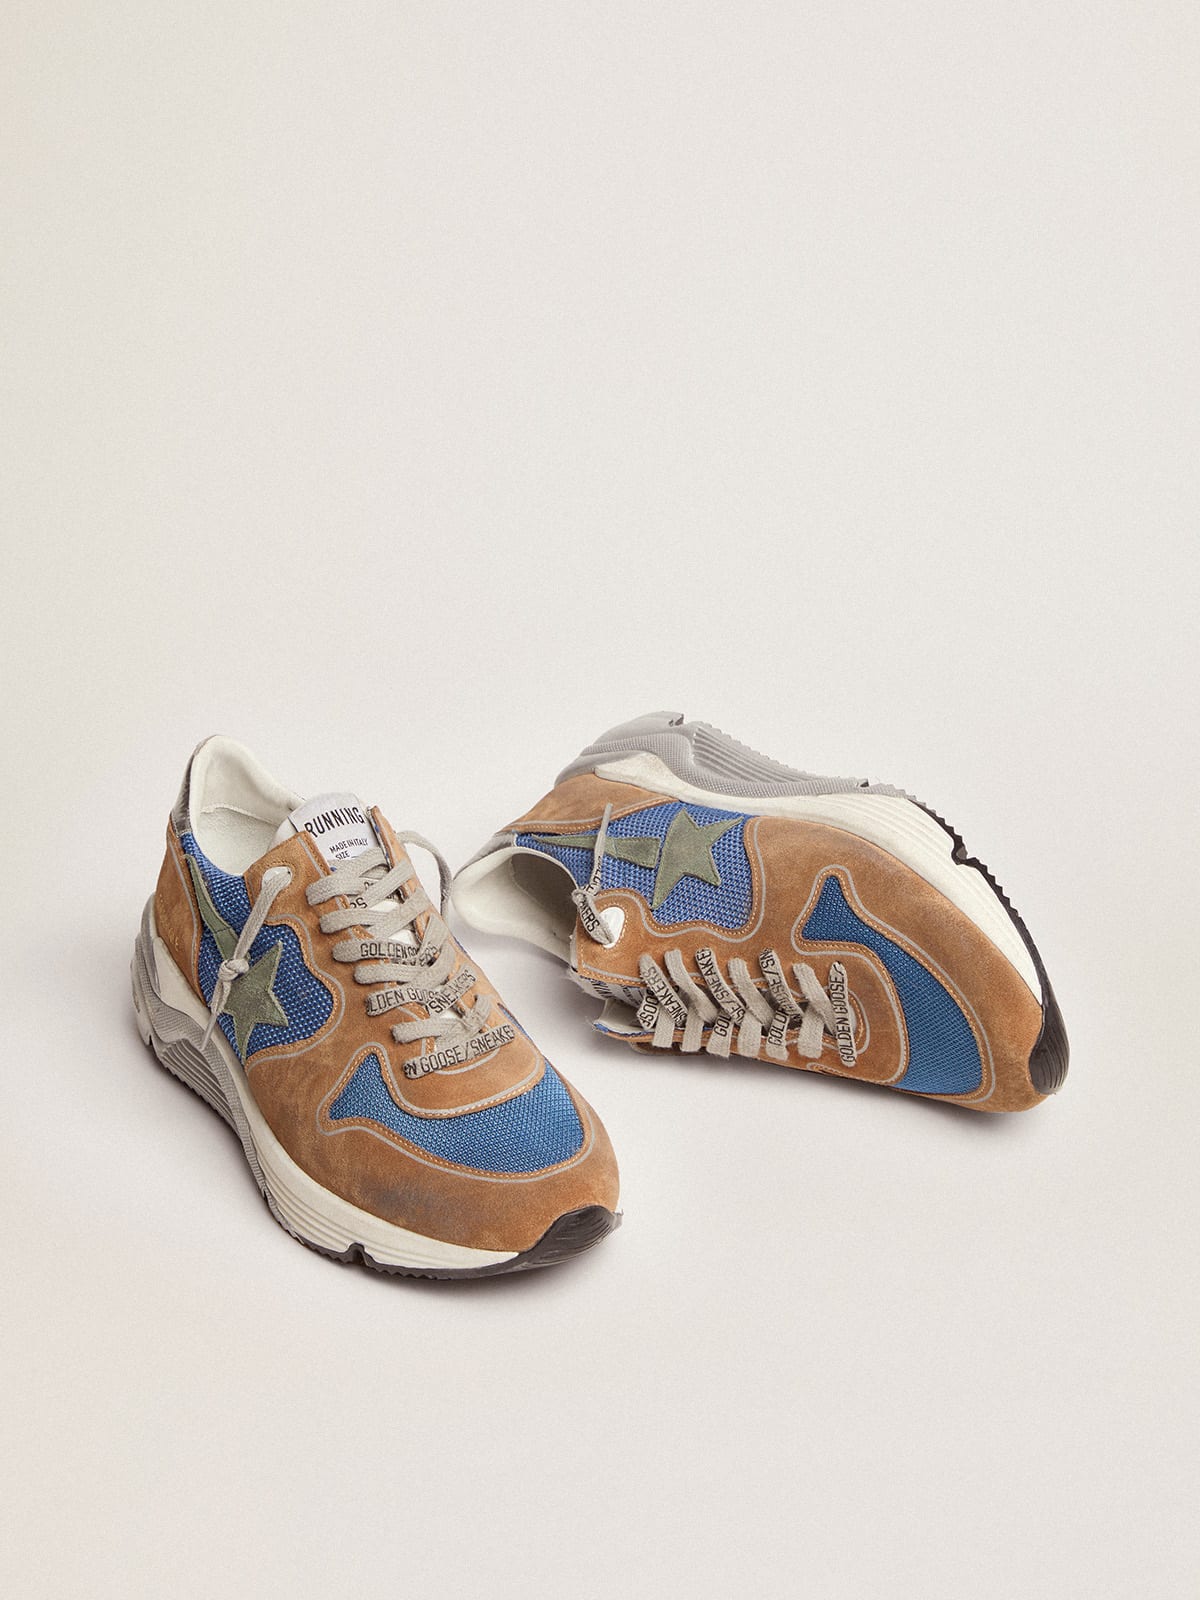 Golden Goose - Running Sole sneakers in light blue mesh with tobacco-colored suede inserts and military-green suede star in 